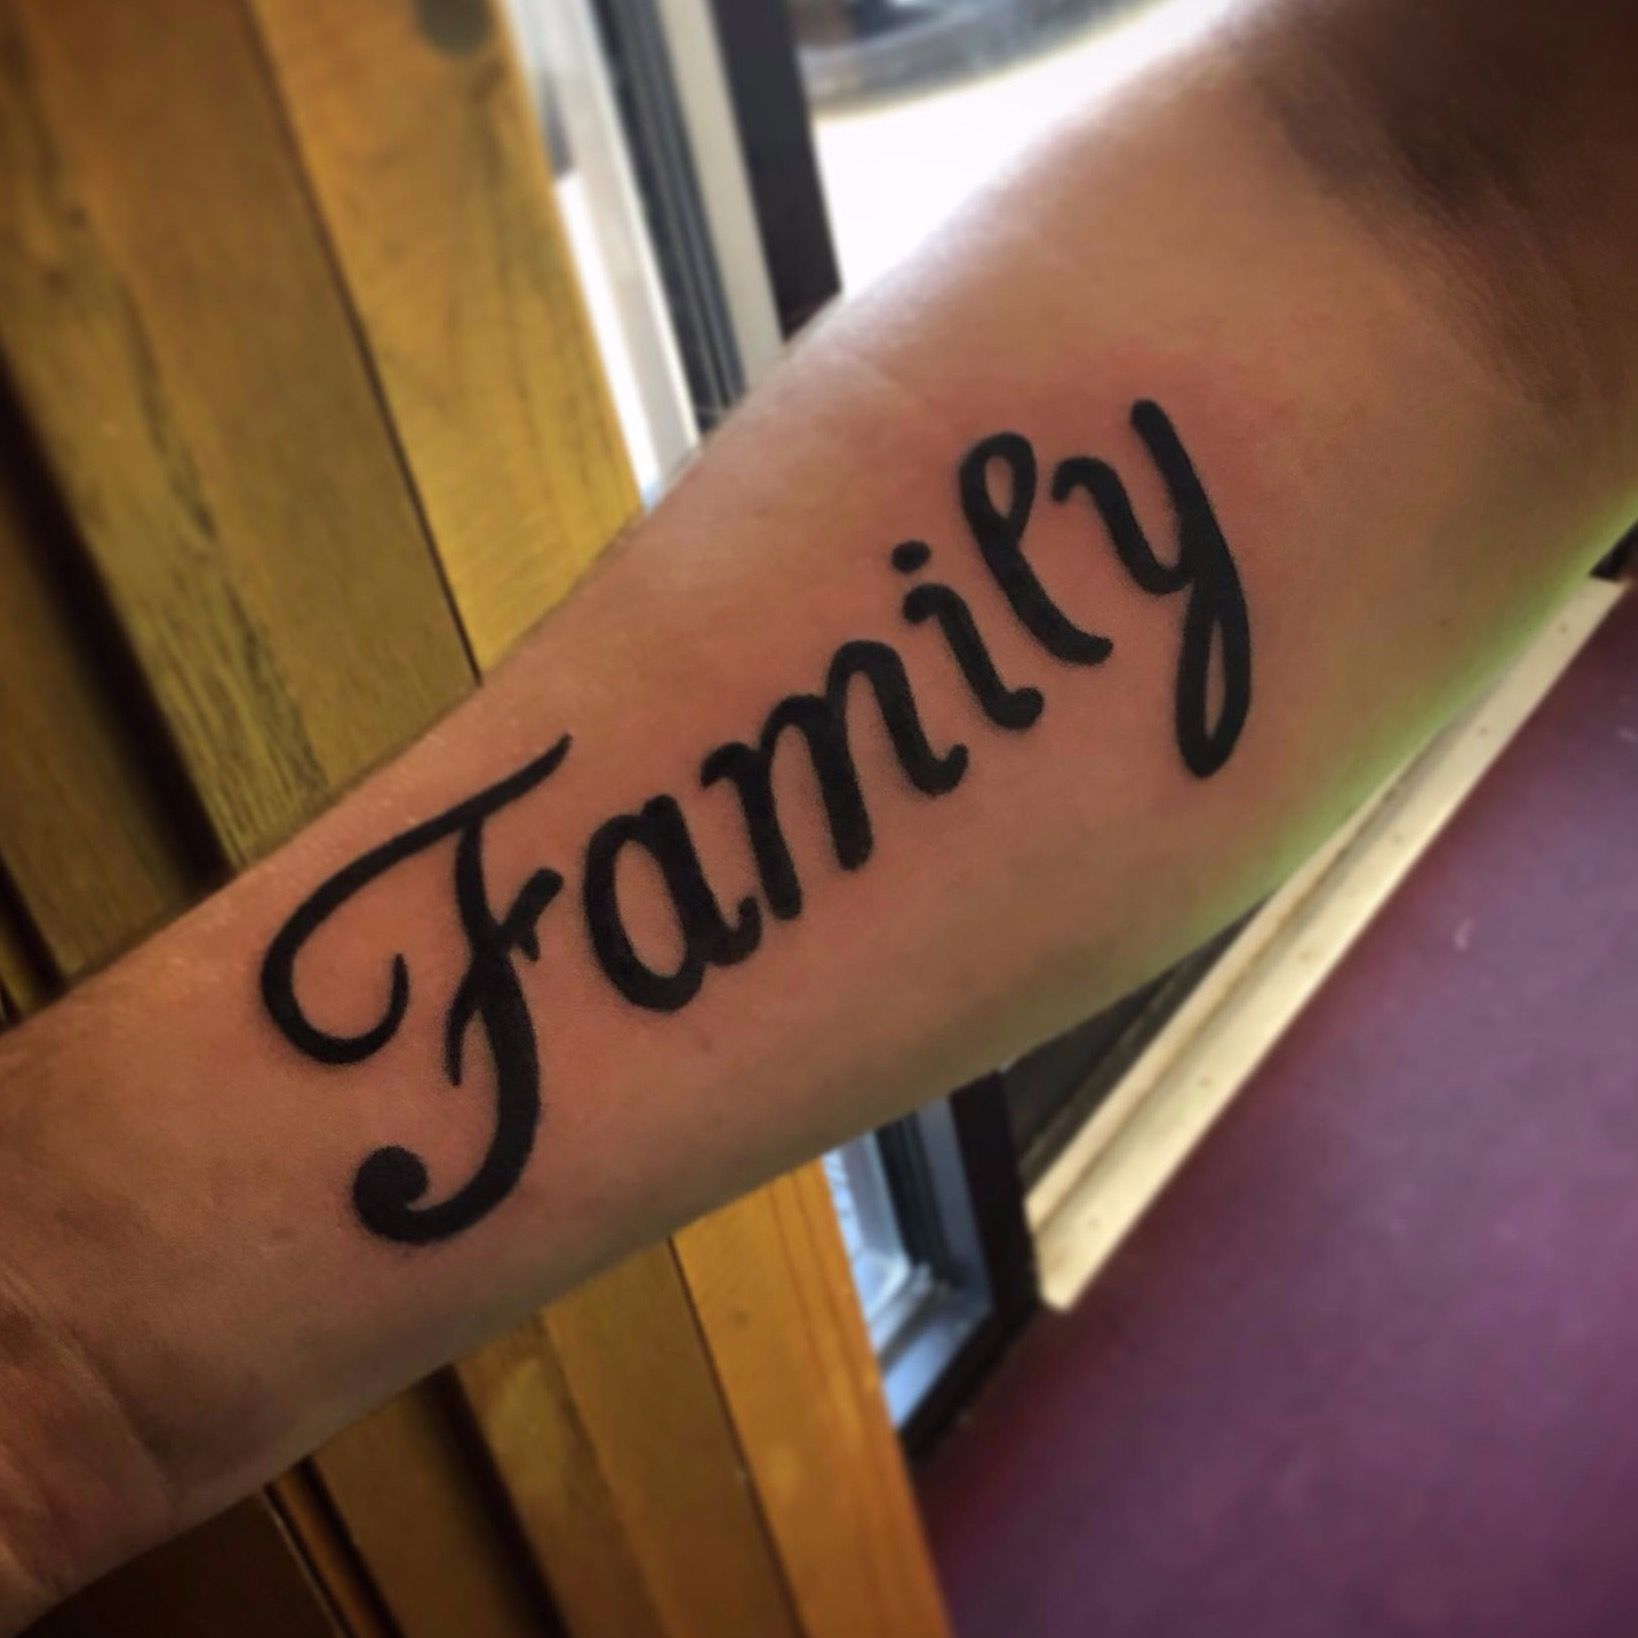 New Ink Tattoo  Family Done for Joseph by Rico  his  Facebook